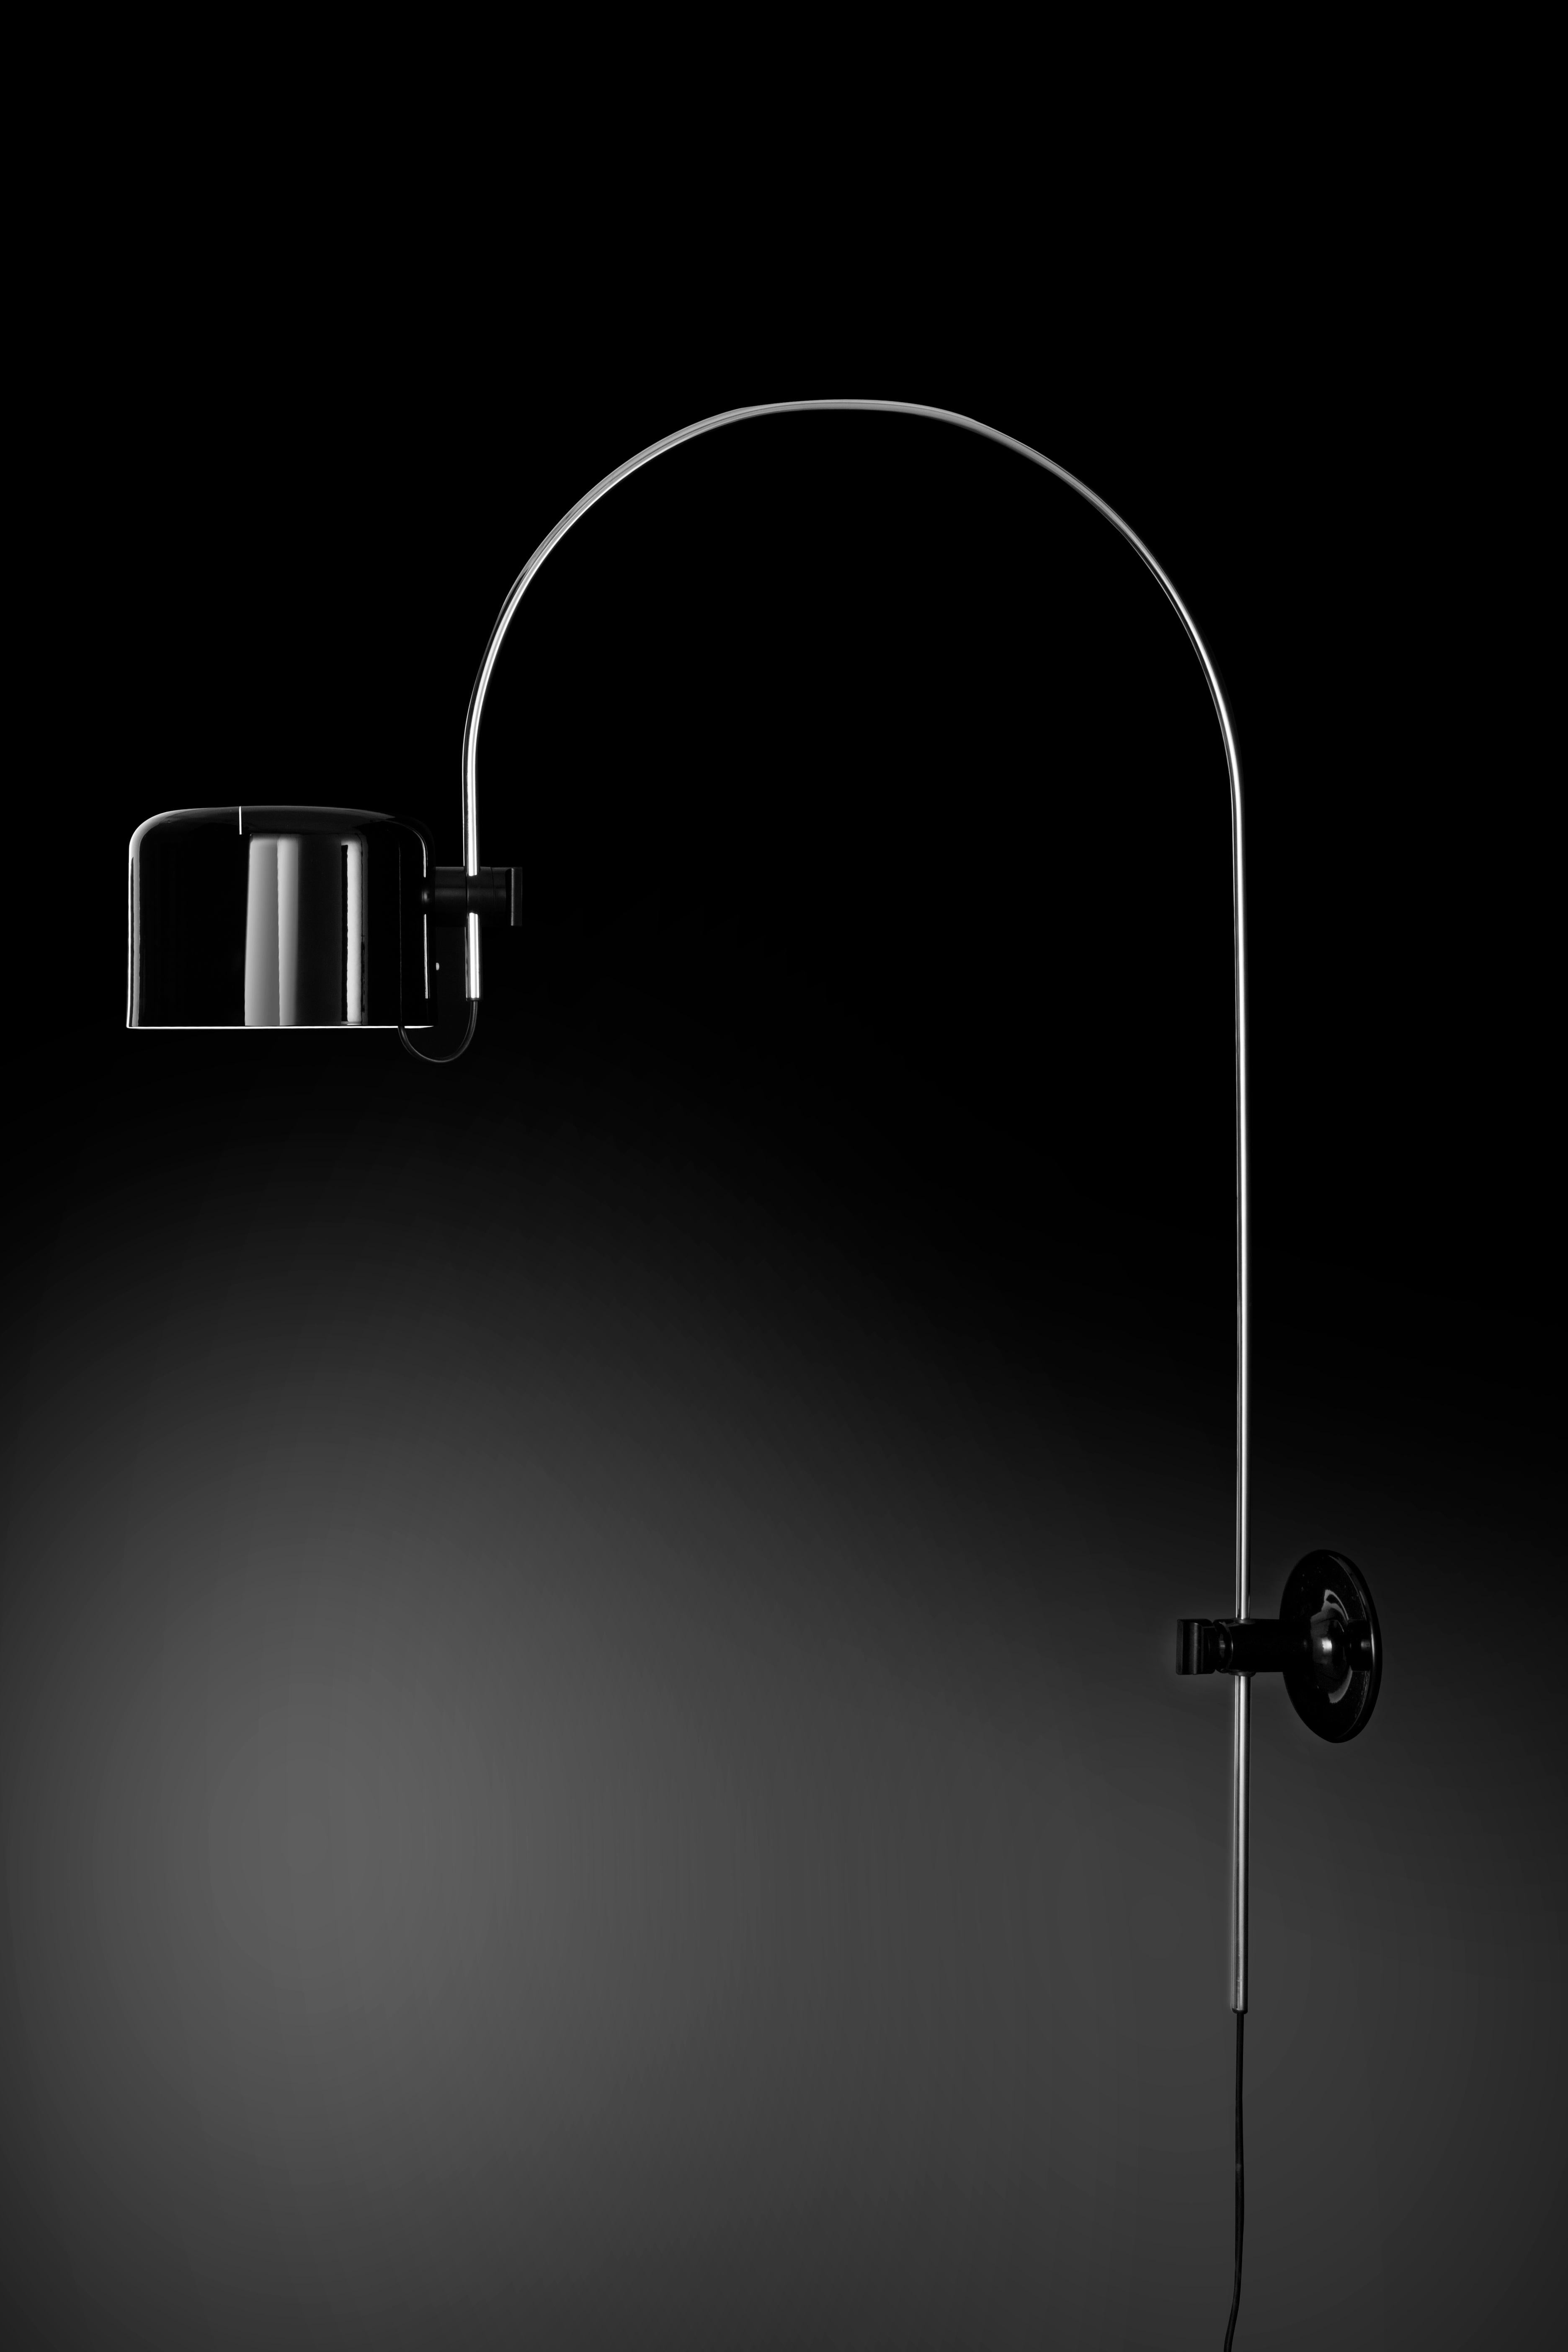 Joe Colombo Model #1158 'Coupé' wall lamp in black for Oluce. 

Executed in black metal and chrome, this is one of the most refined Minimalist Italian designs of the midcentury and an icon for Colombo. A highly adjustable wall light, the shade can